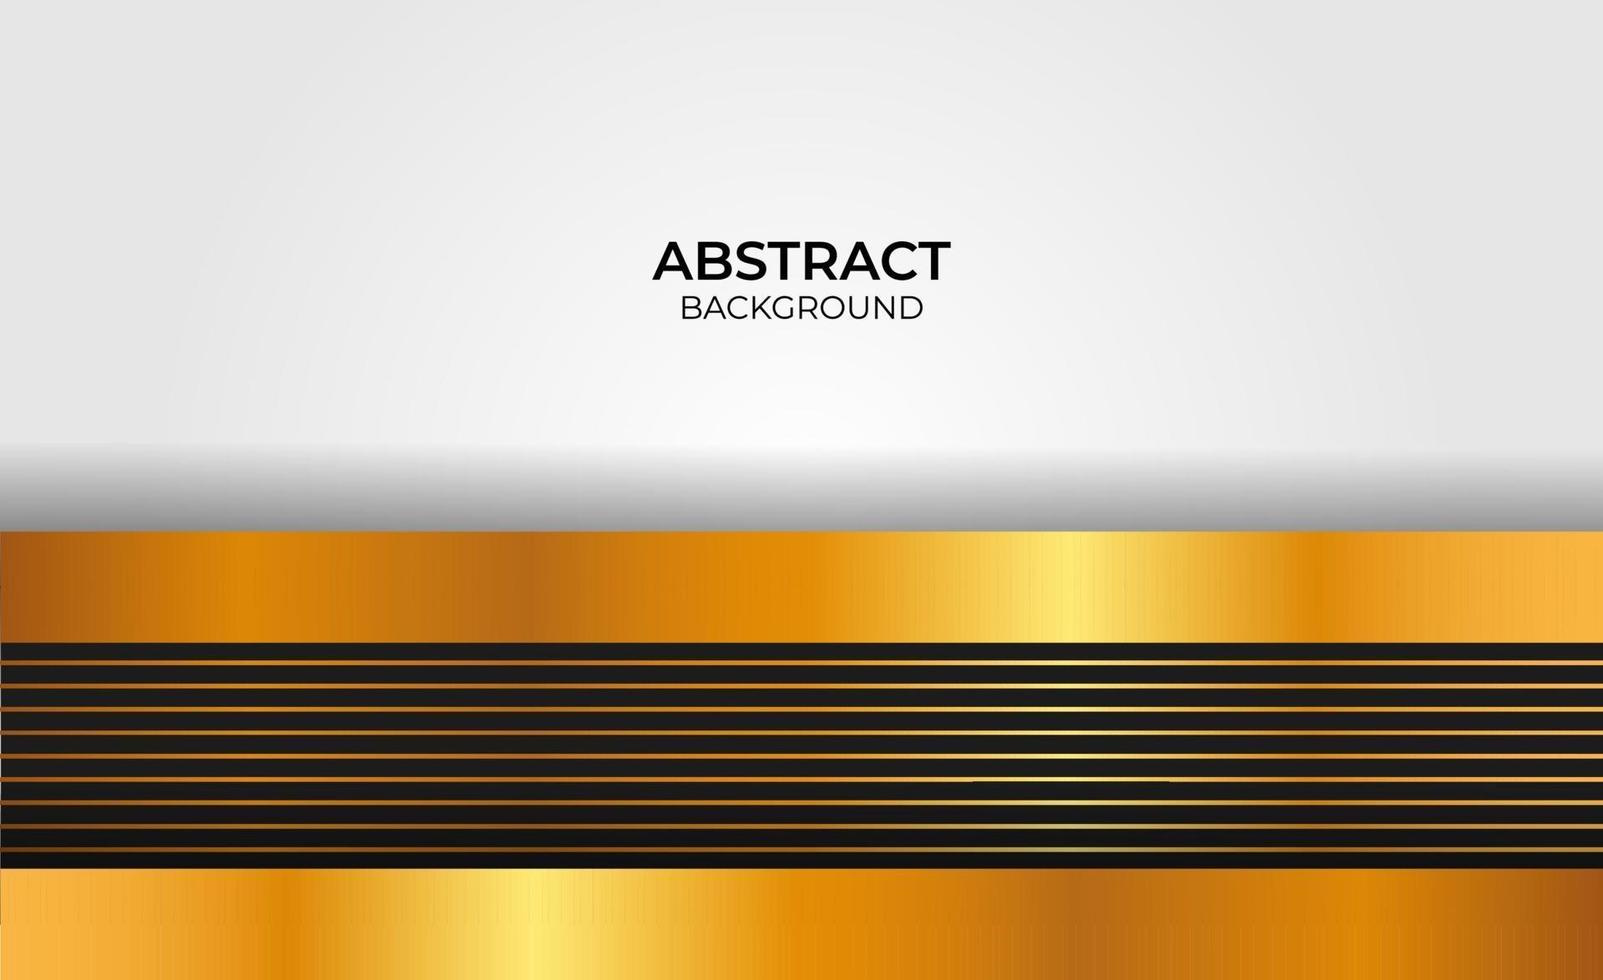 Design abstract gold and black background vector